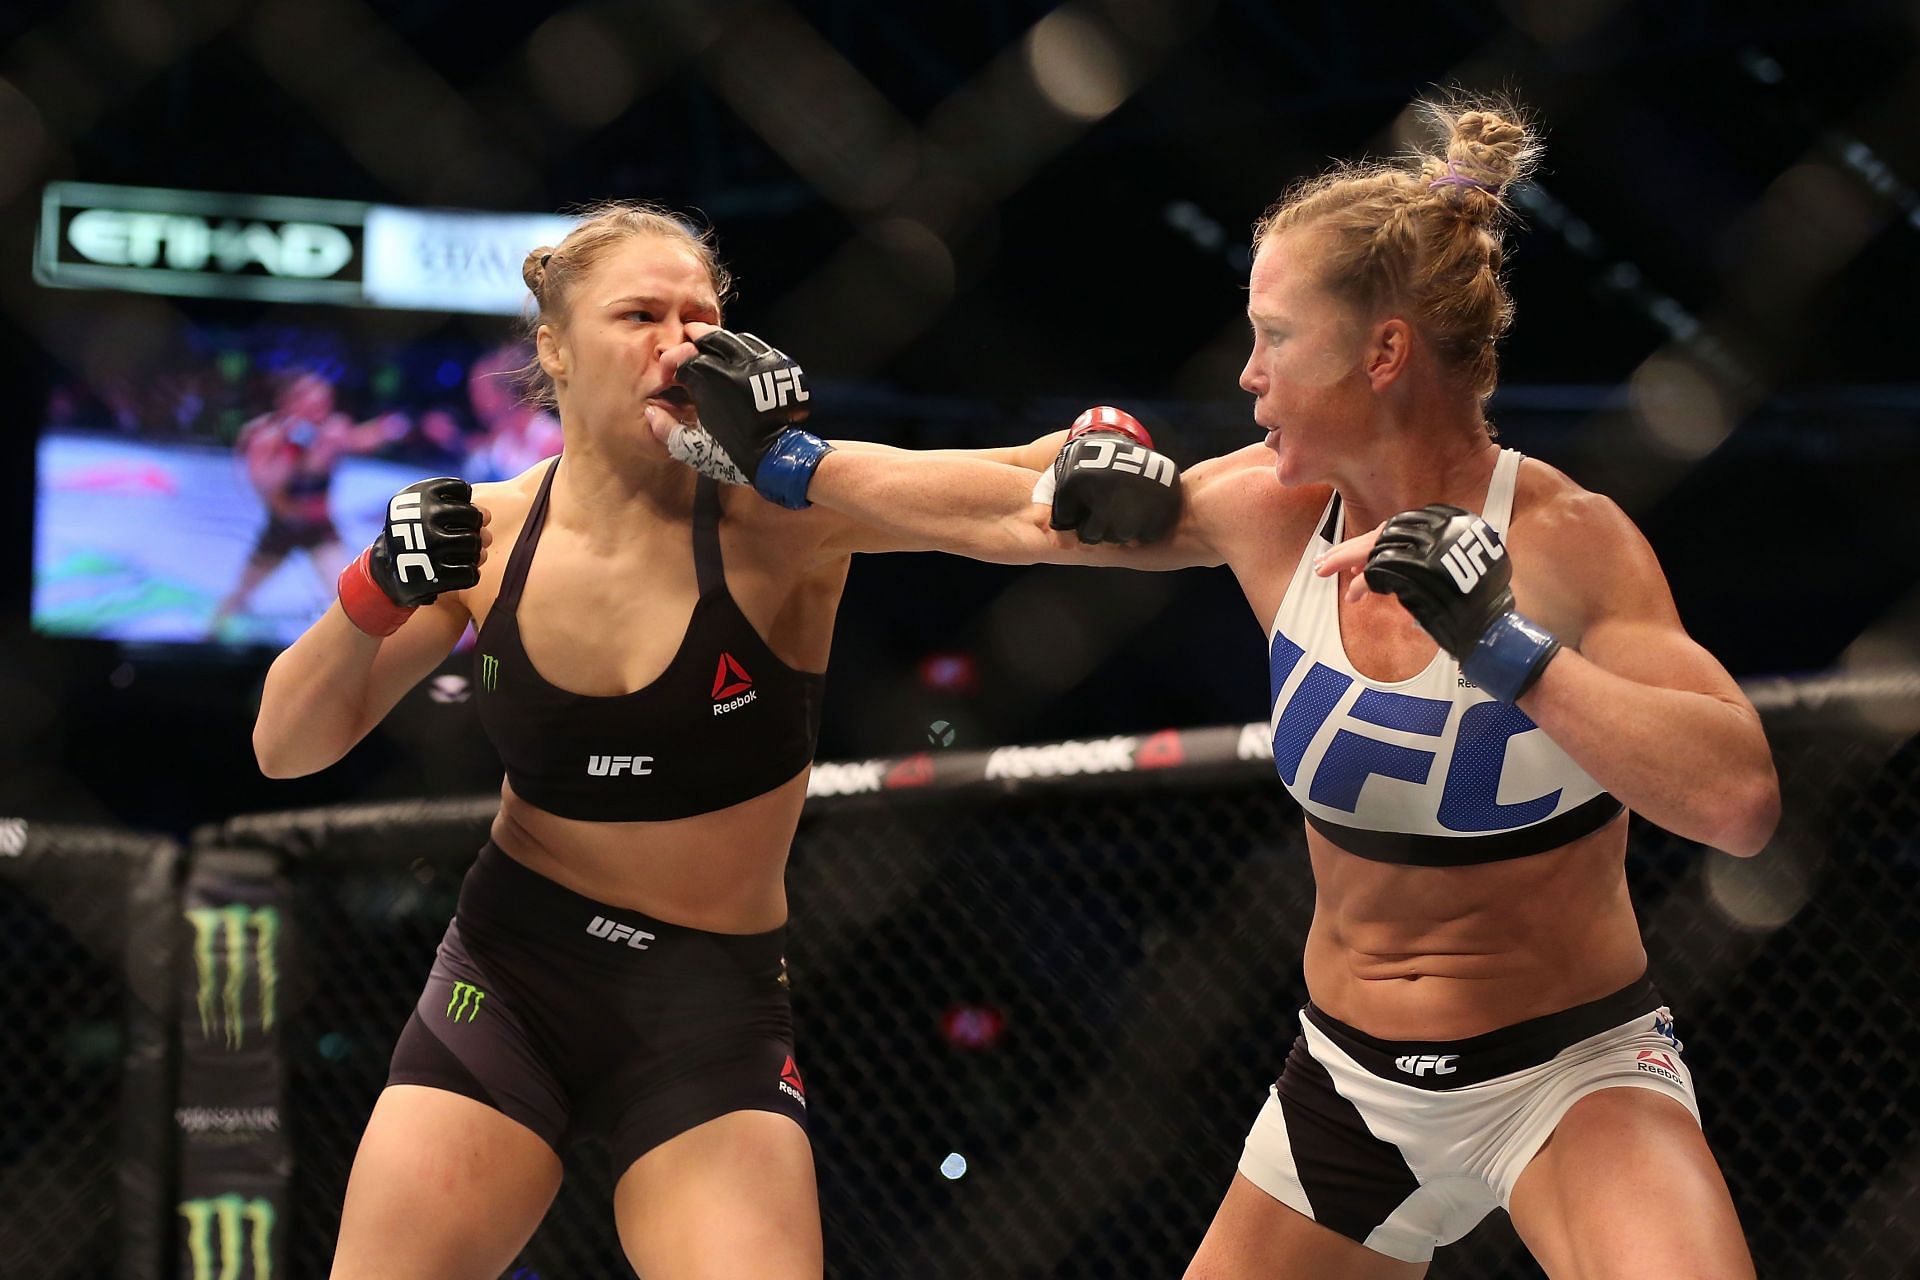 Holm defeated Rousey on November 15 2015